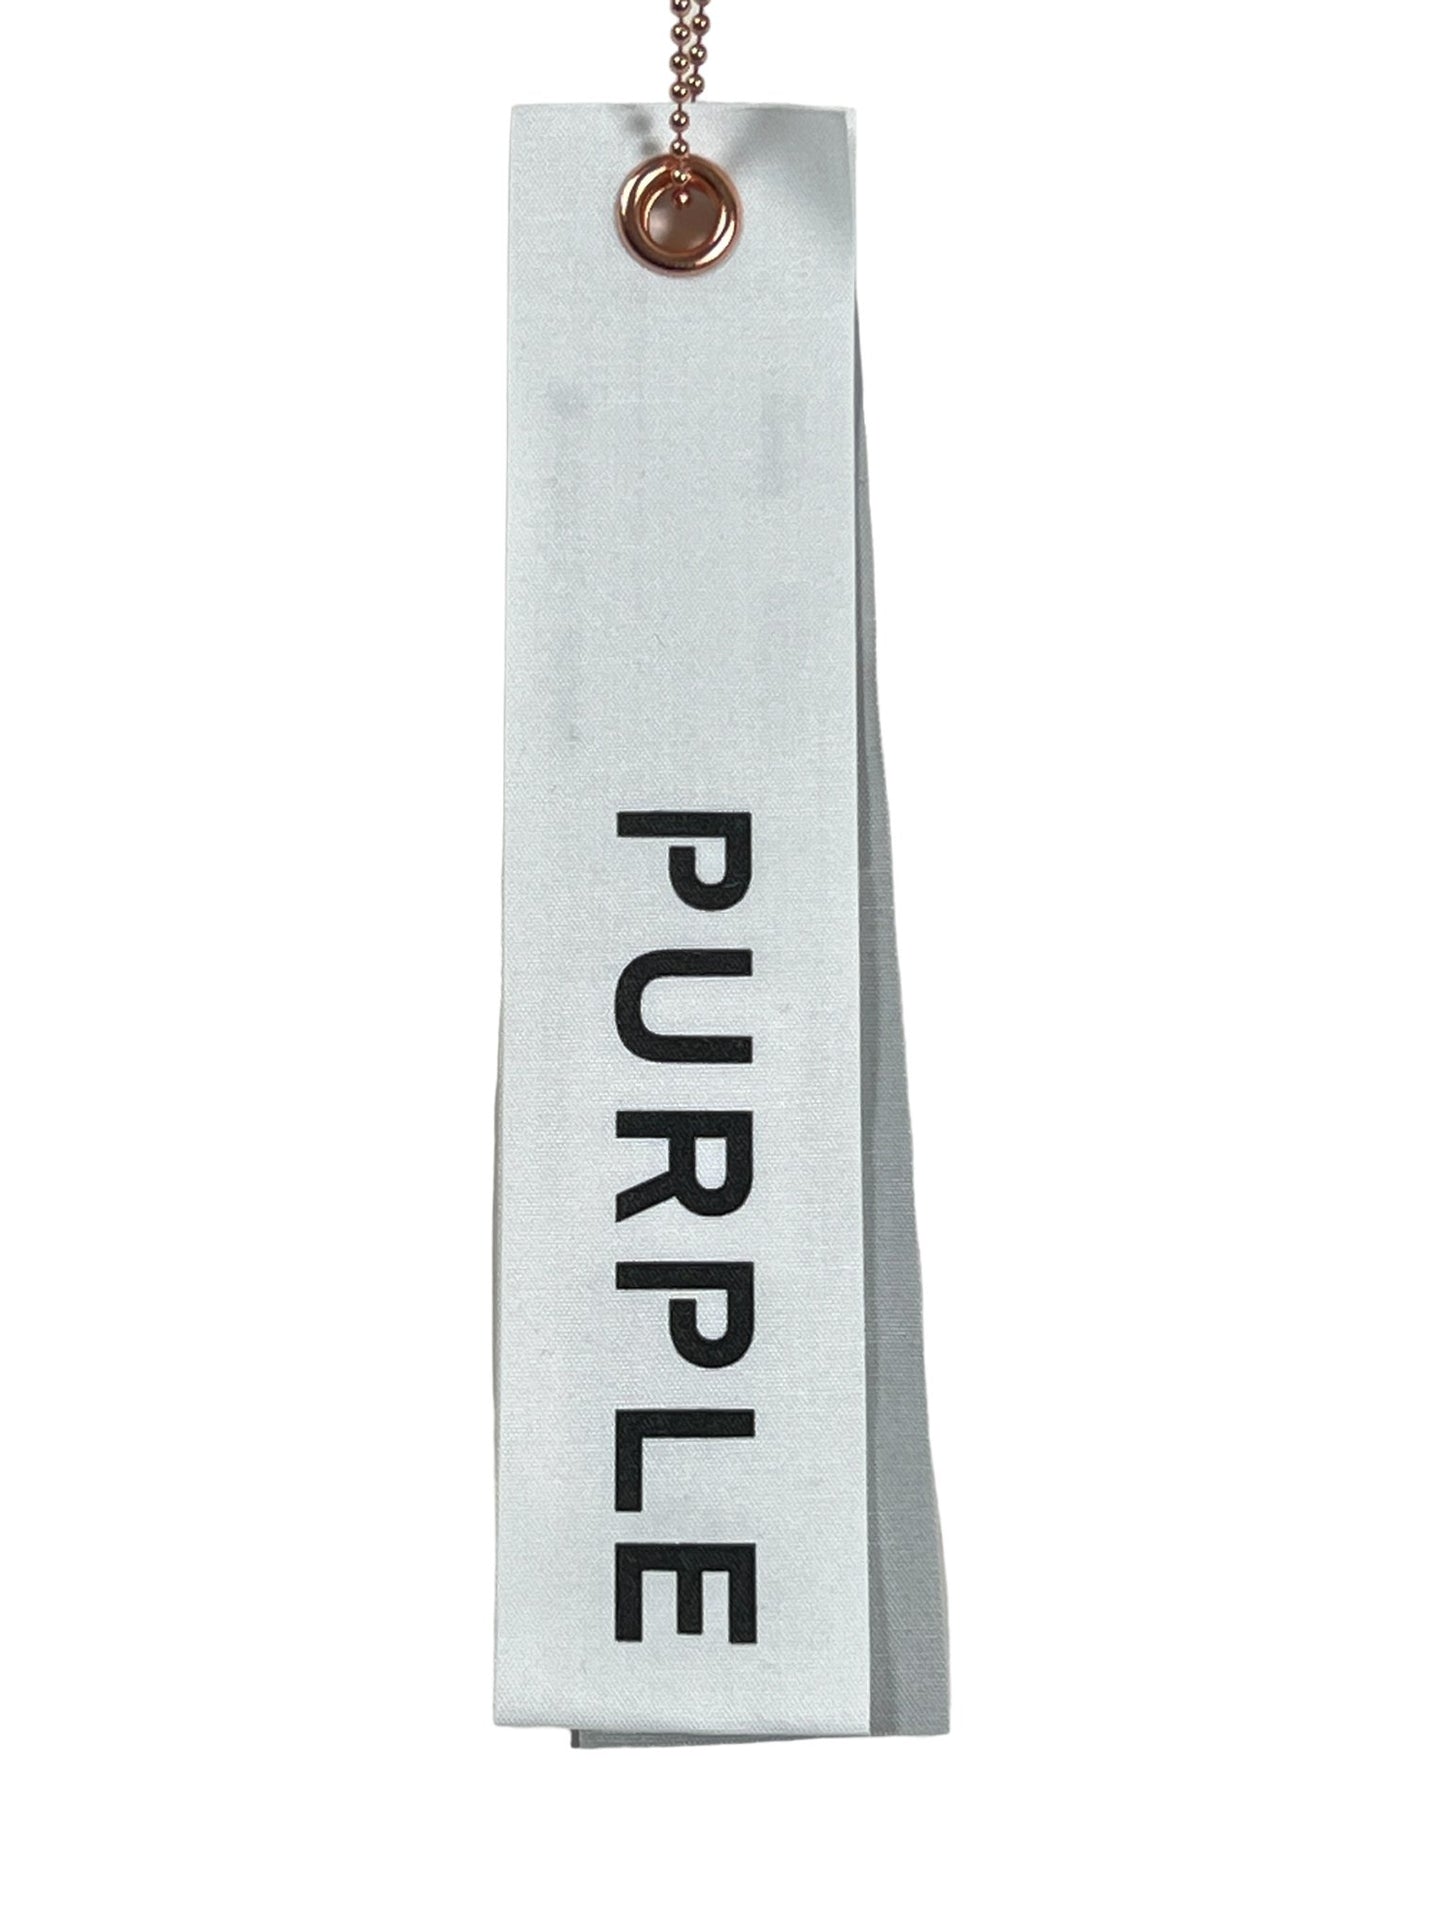 Gray bookmark with the word "PURPLE BRAND P104-JBBW TEXTURED JERSEY SS TEE BLACK" printed in black, hanging by a copper ring against a white background.